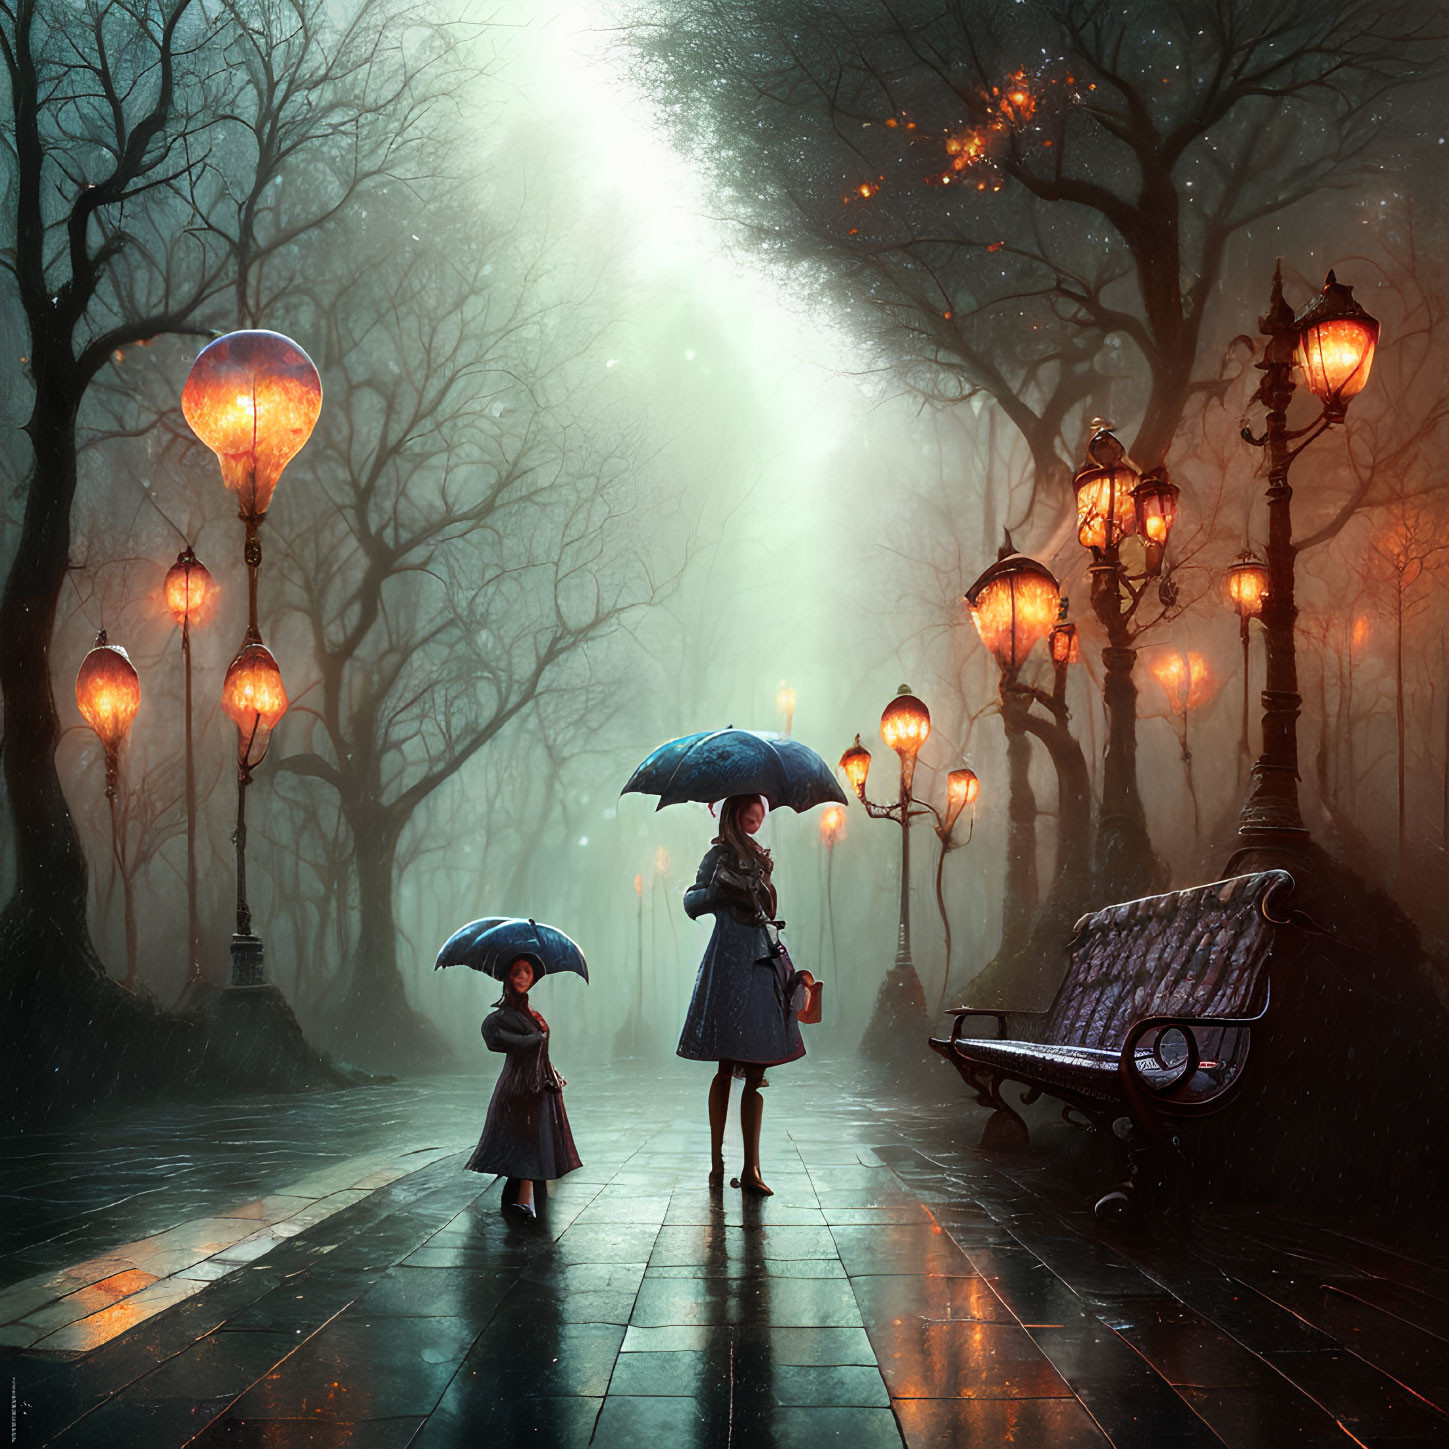 Two people with umbrellas on reflective path with lanterns and trees under green light